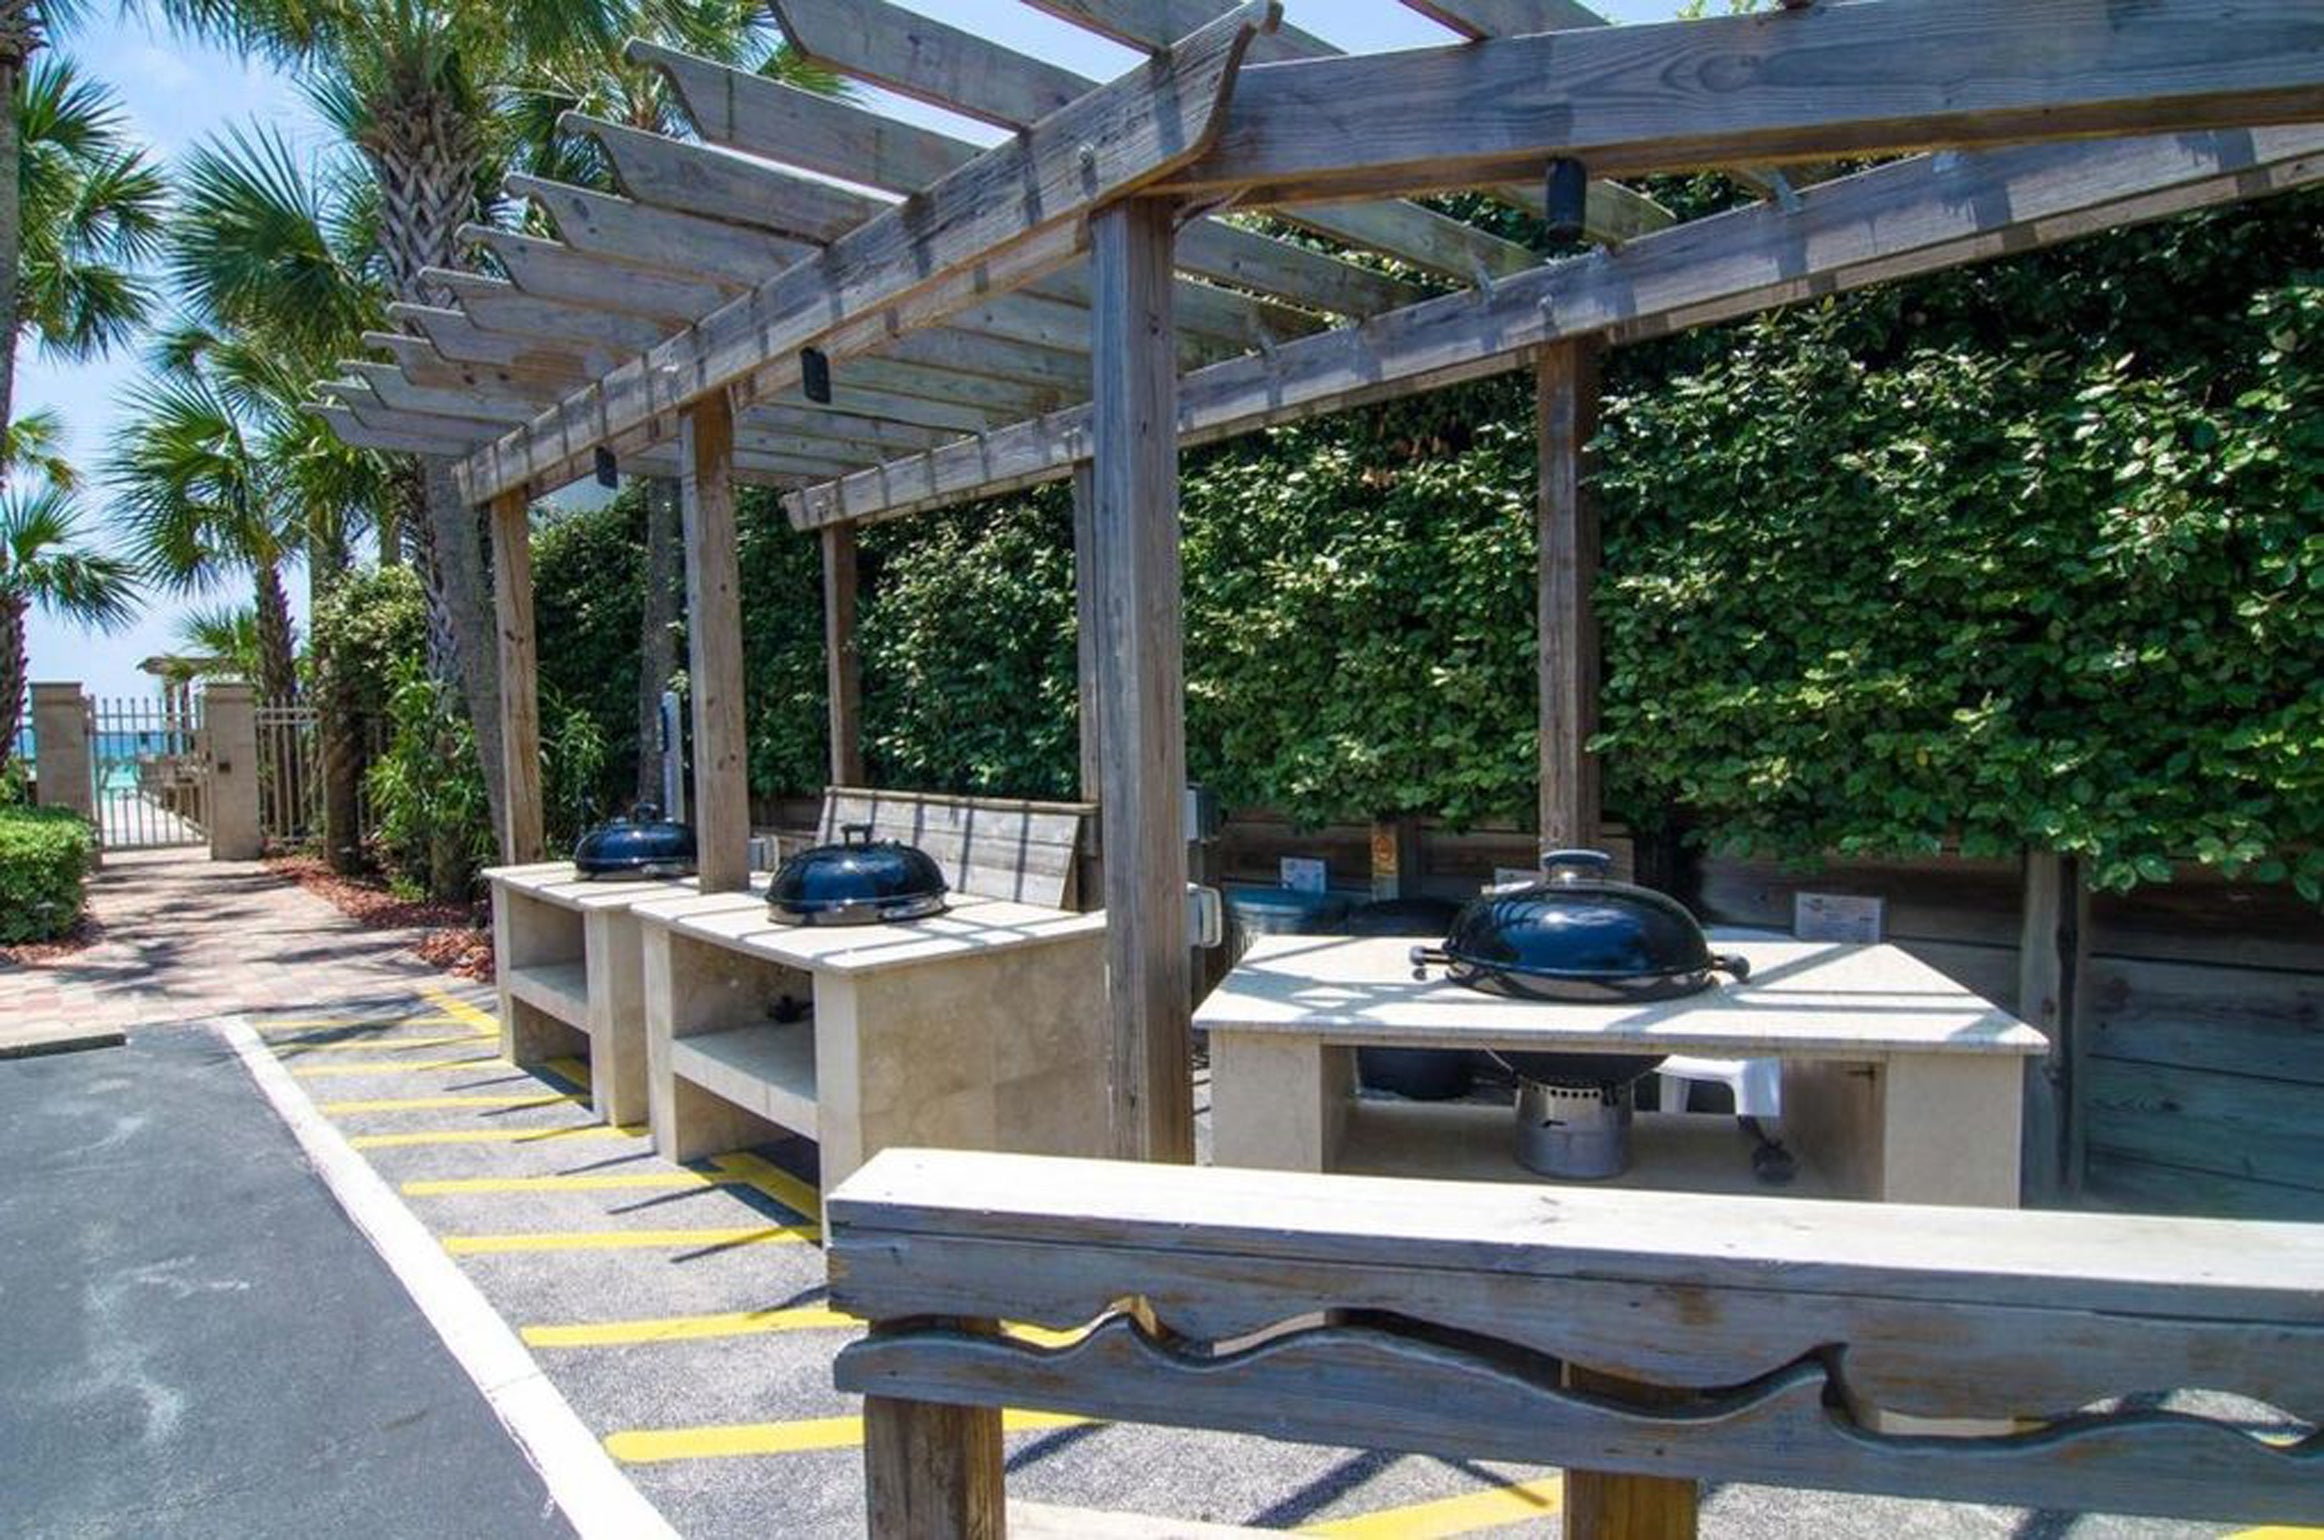 Grills with Granite Slabs for Prep